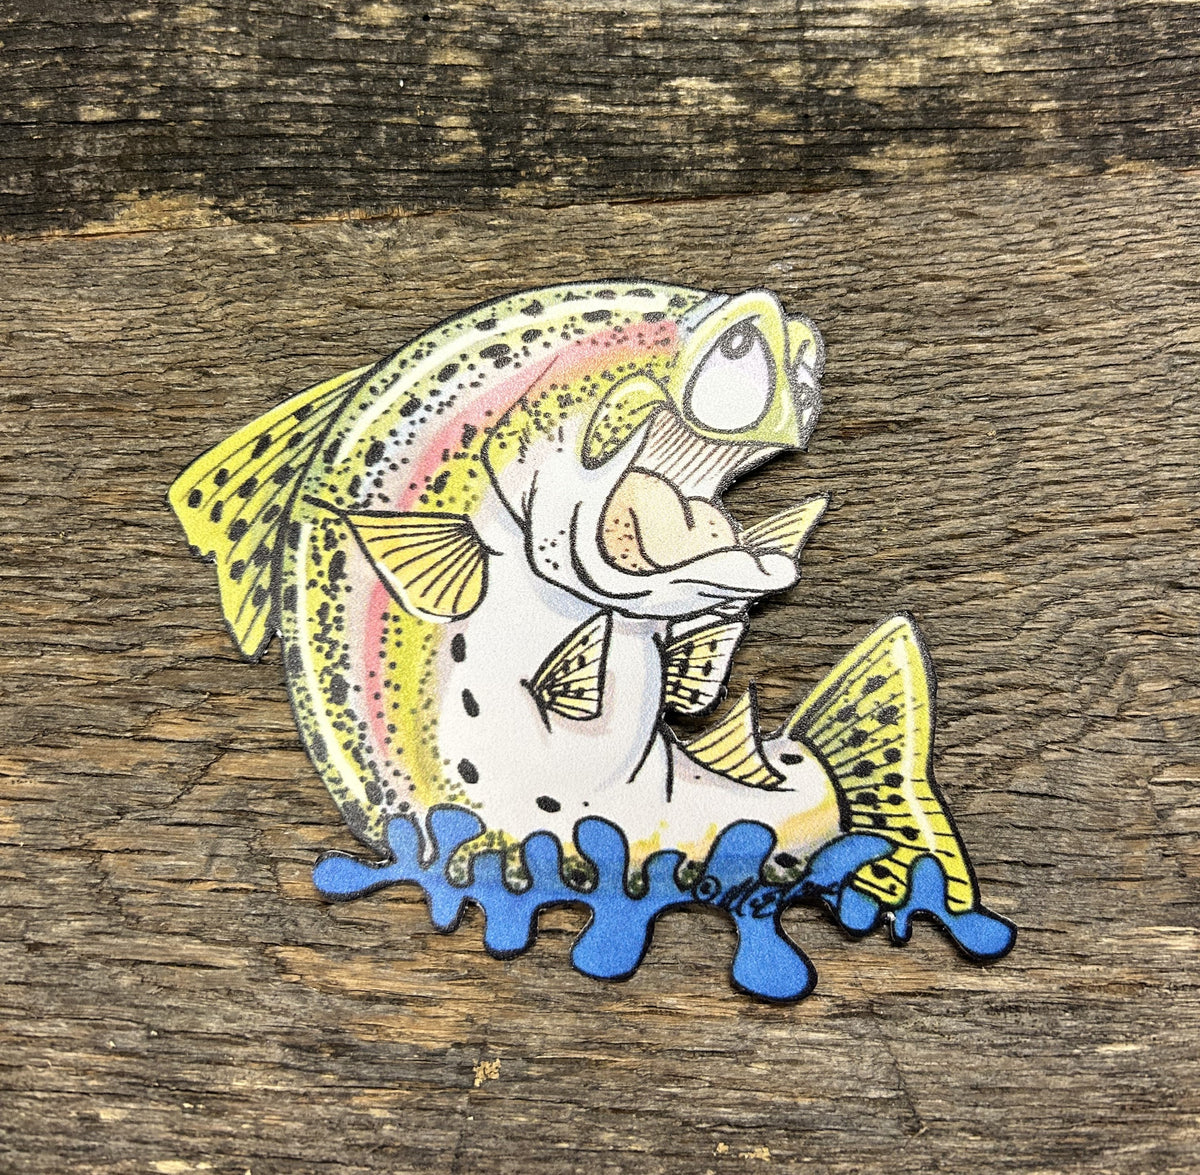 Rainbow Trout Decal – Fishing Complete Inc